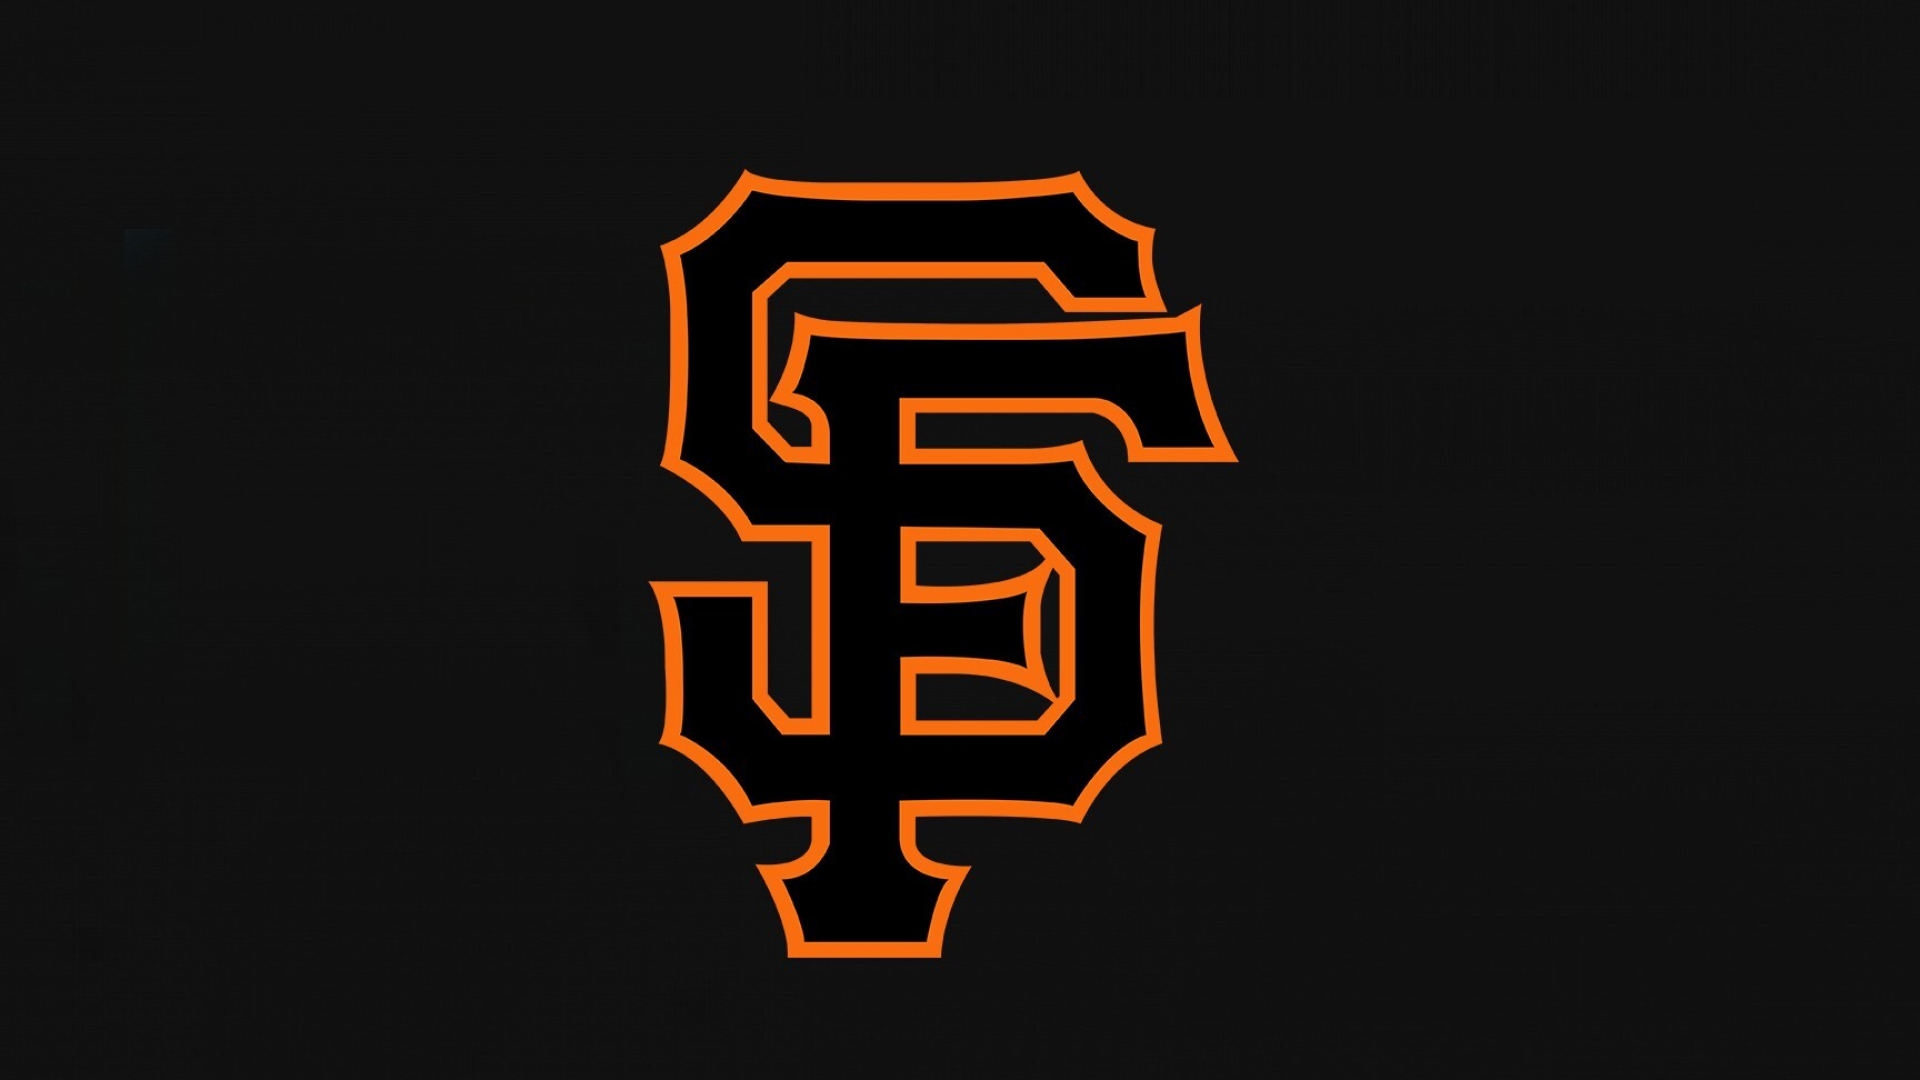 San Francisco Giants: The team swept the Yankees in four games in the 1922 World Series. 1920x1080 Full HD Wallpaper.